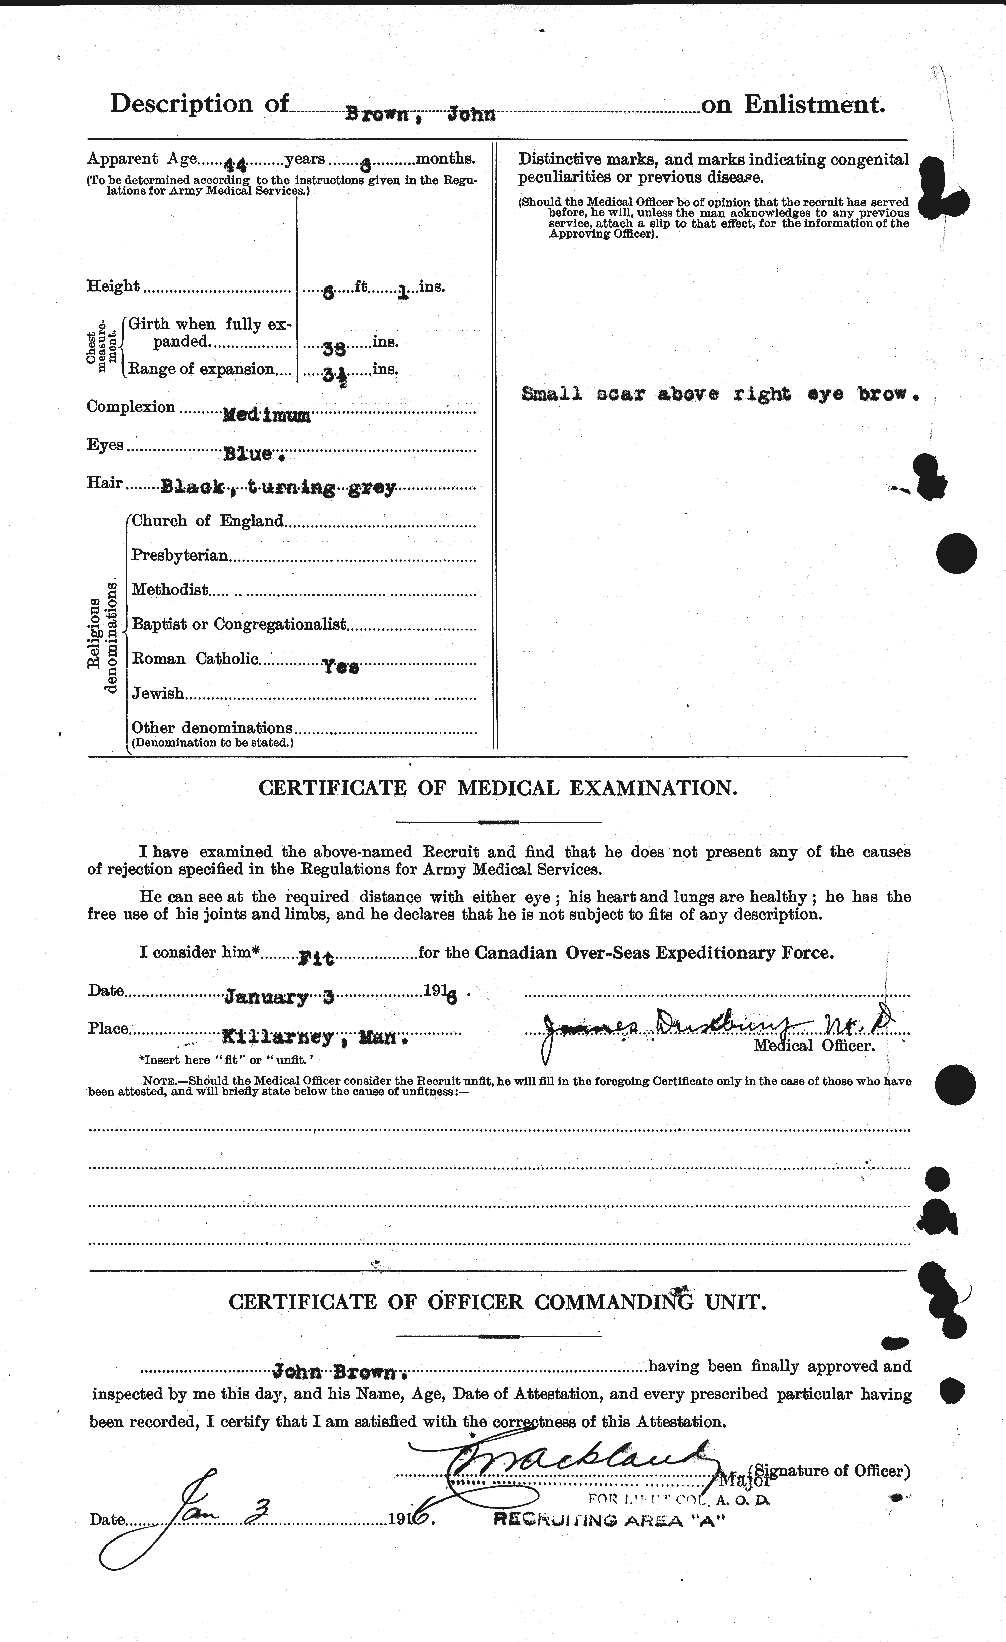 Personnel Records of the First World War - CEF 265863b